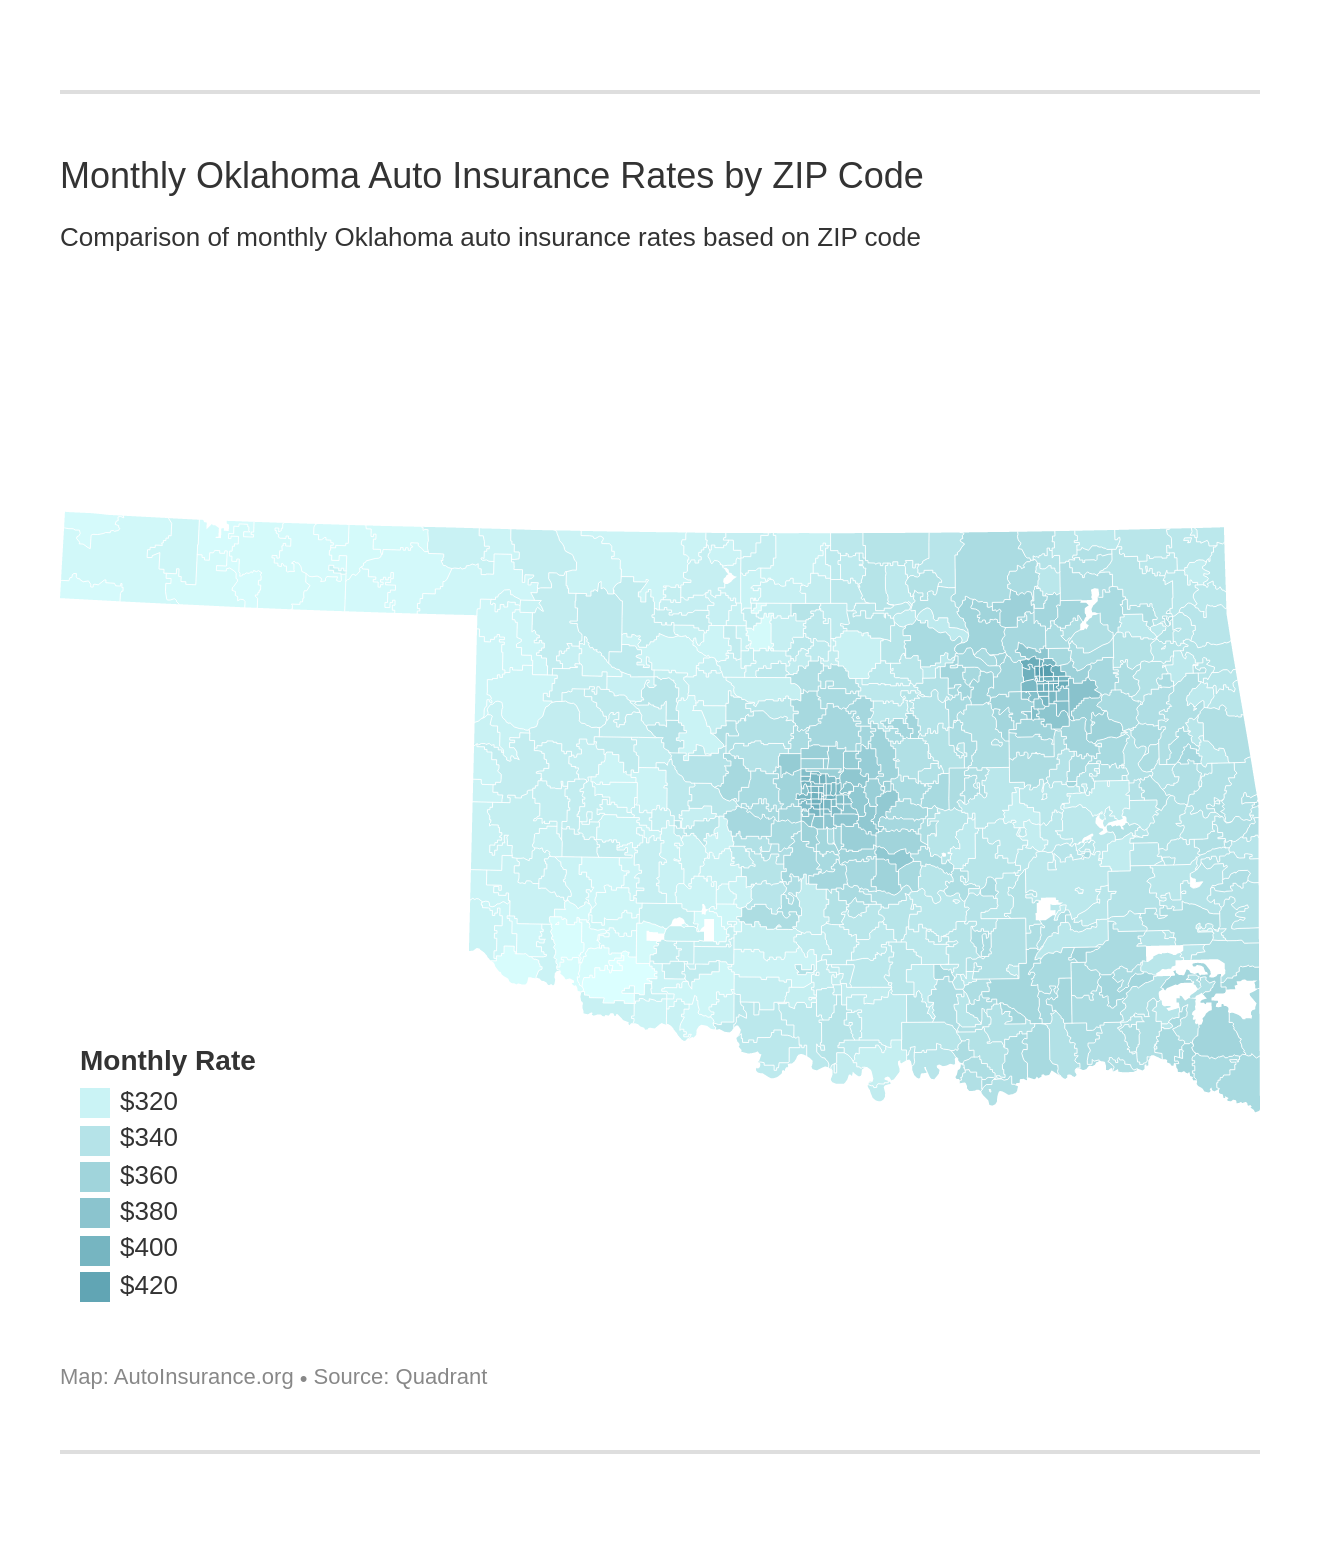 Monthly Oklahoma Auto Insurance Rates by ZIP Code